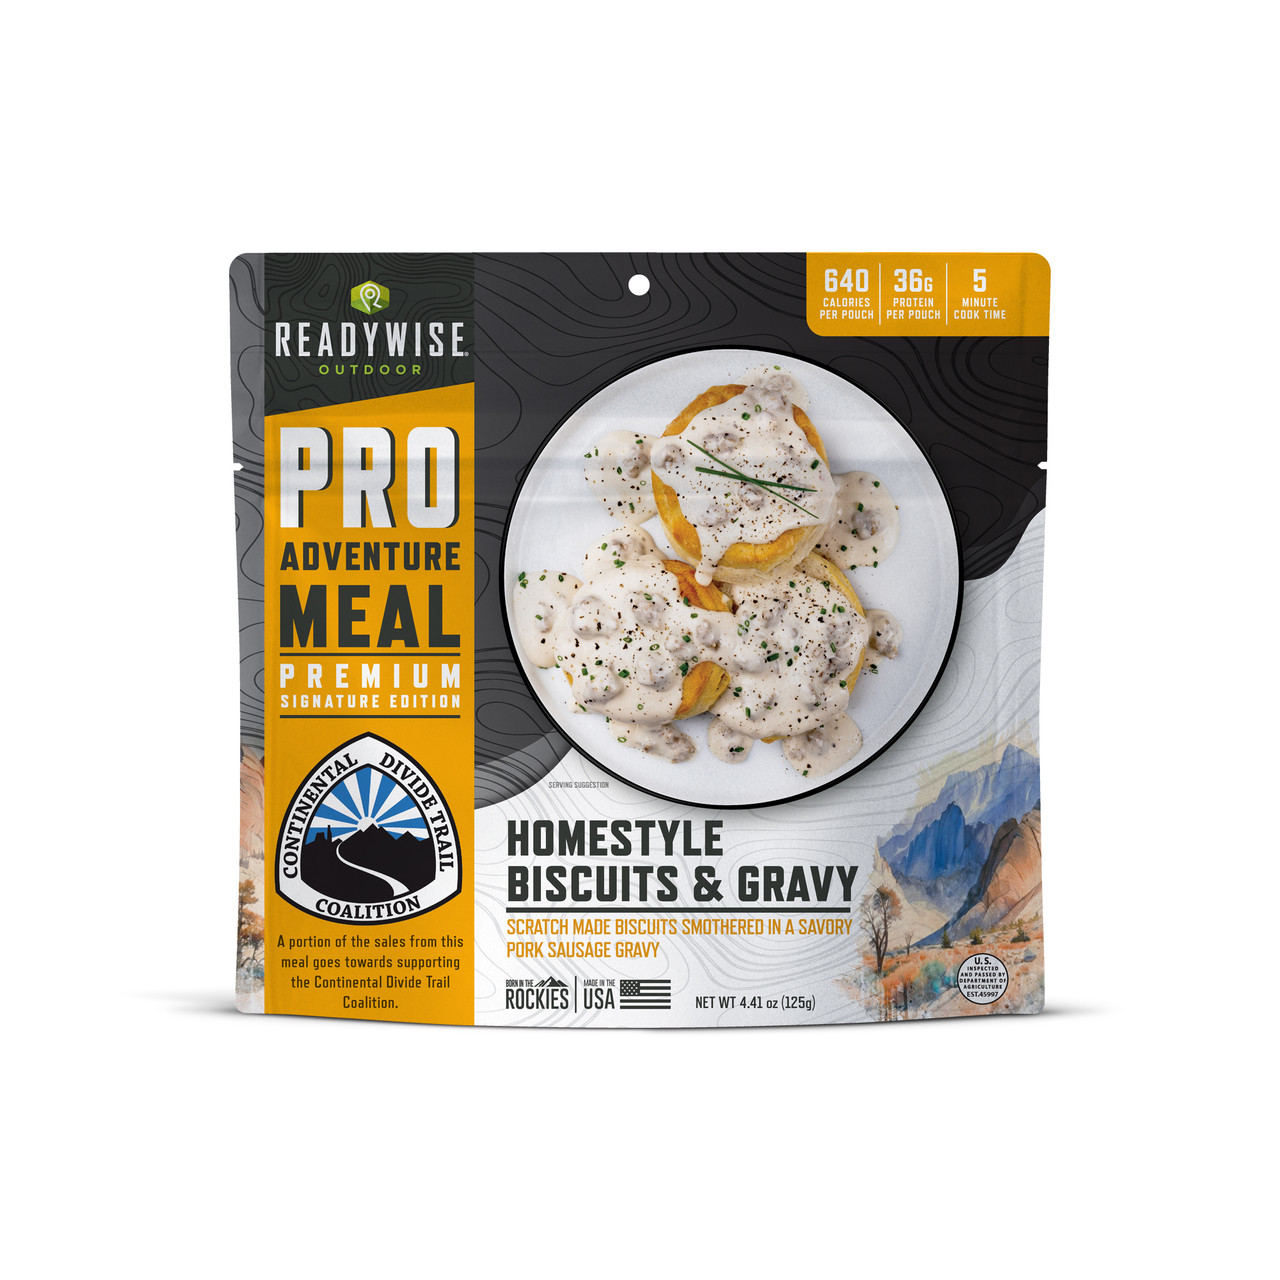 6 Pack ReadyWise Pro Adventure Meal Homestyle Biscuits & Gravy with Sausage